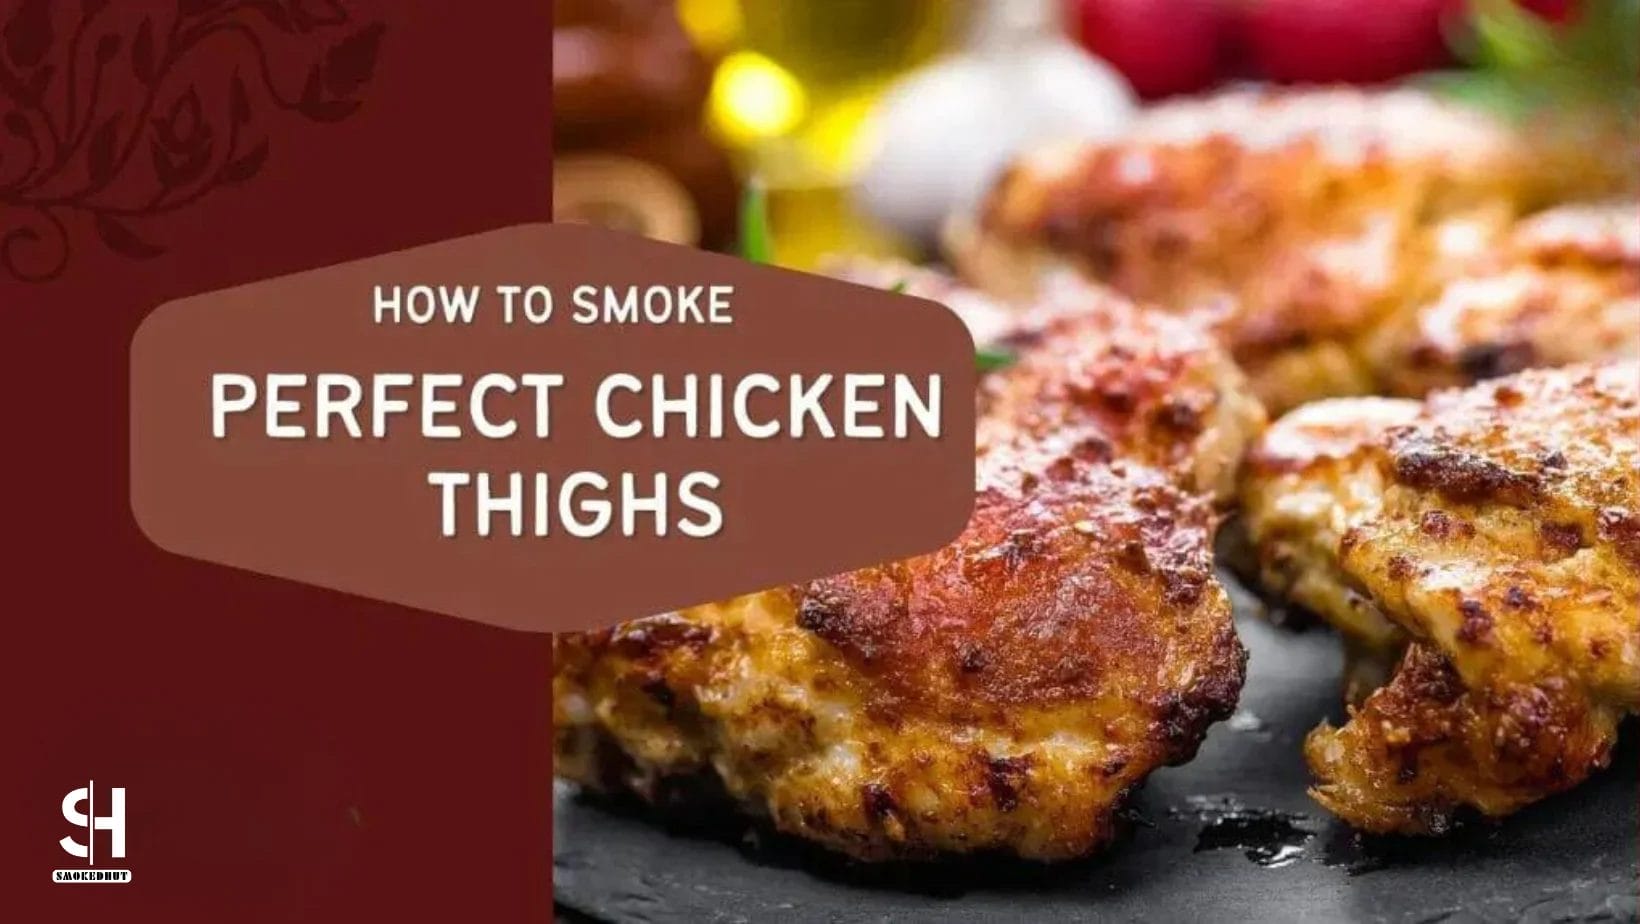 HOW TO SMOKE CHICKEN THIGHS